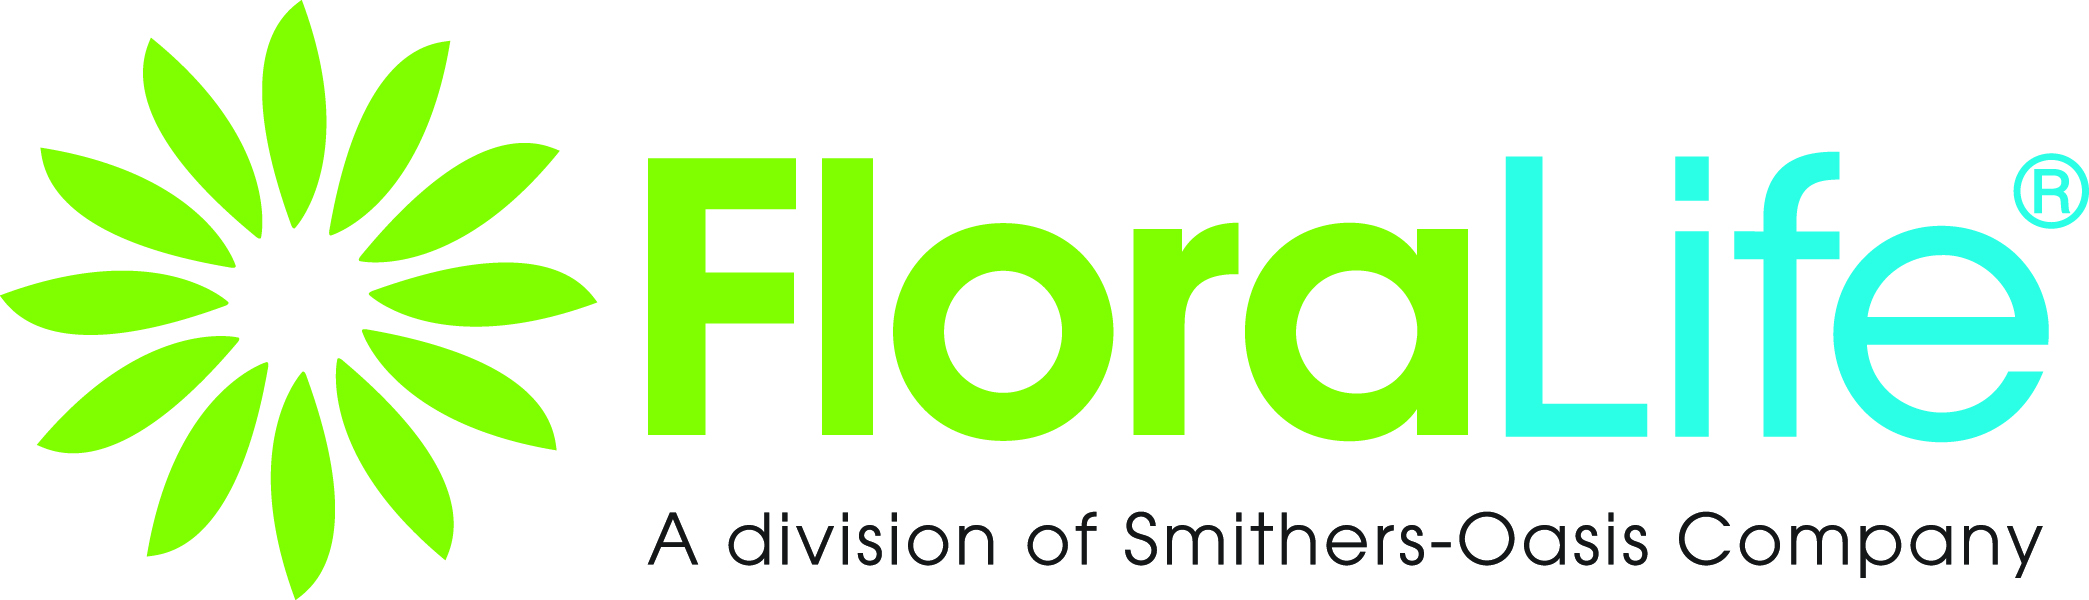 Floralife, a division of Smithers-Oasis Company